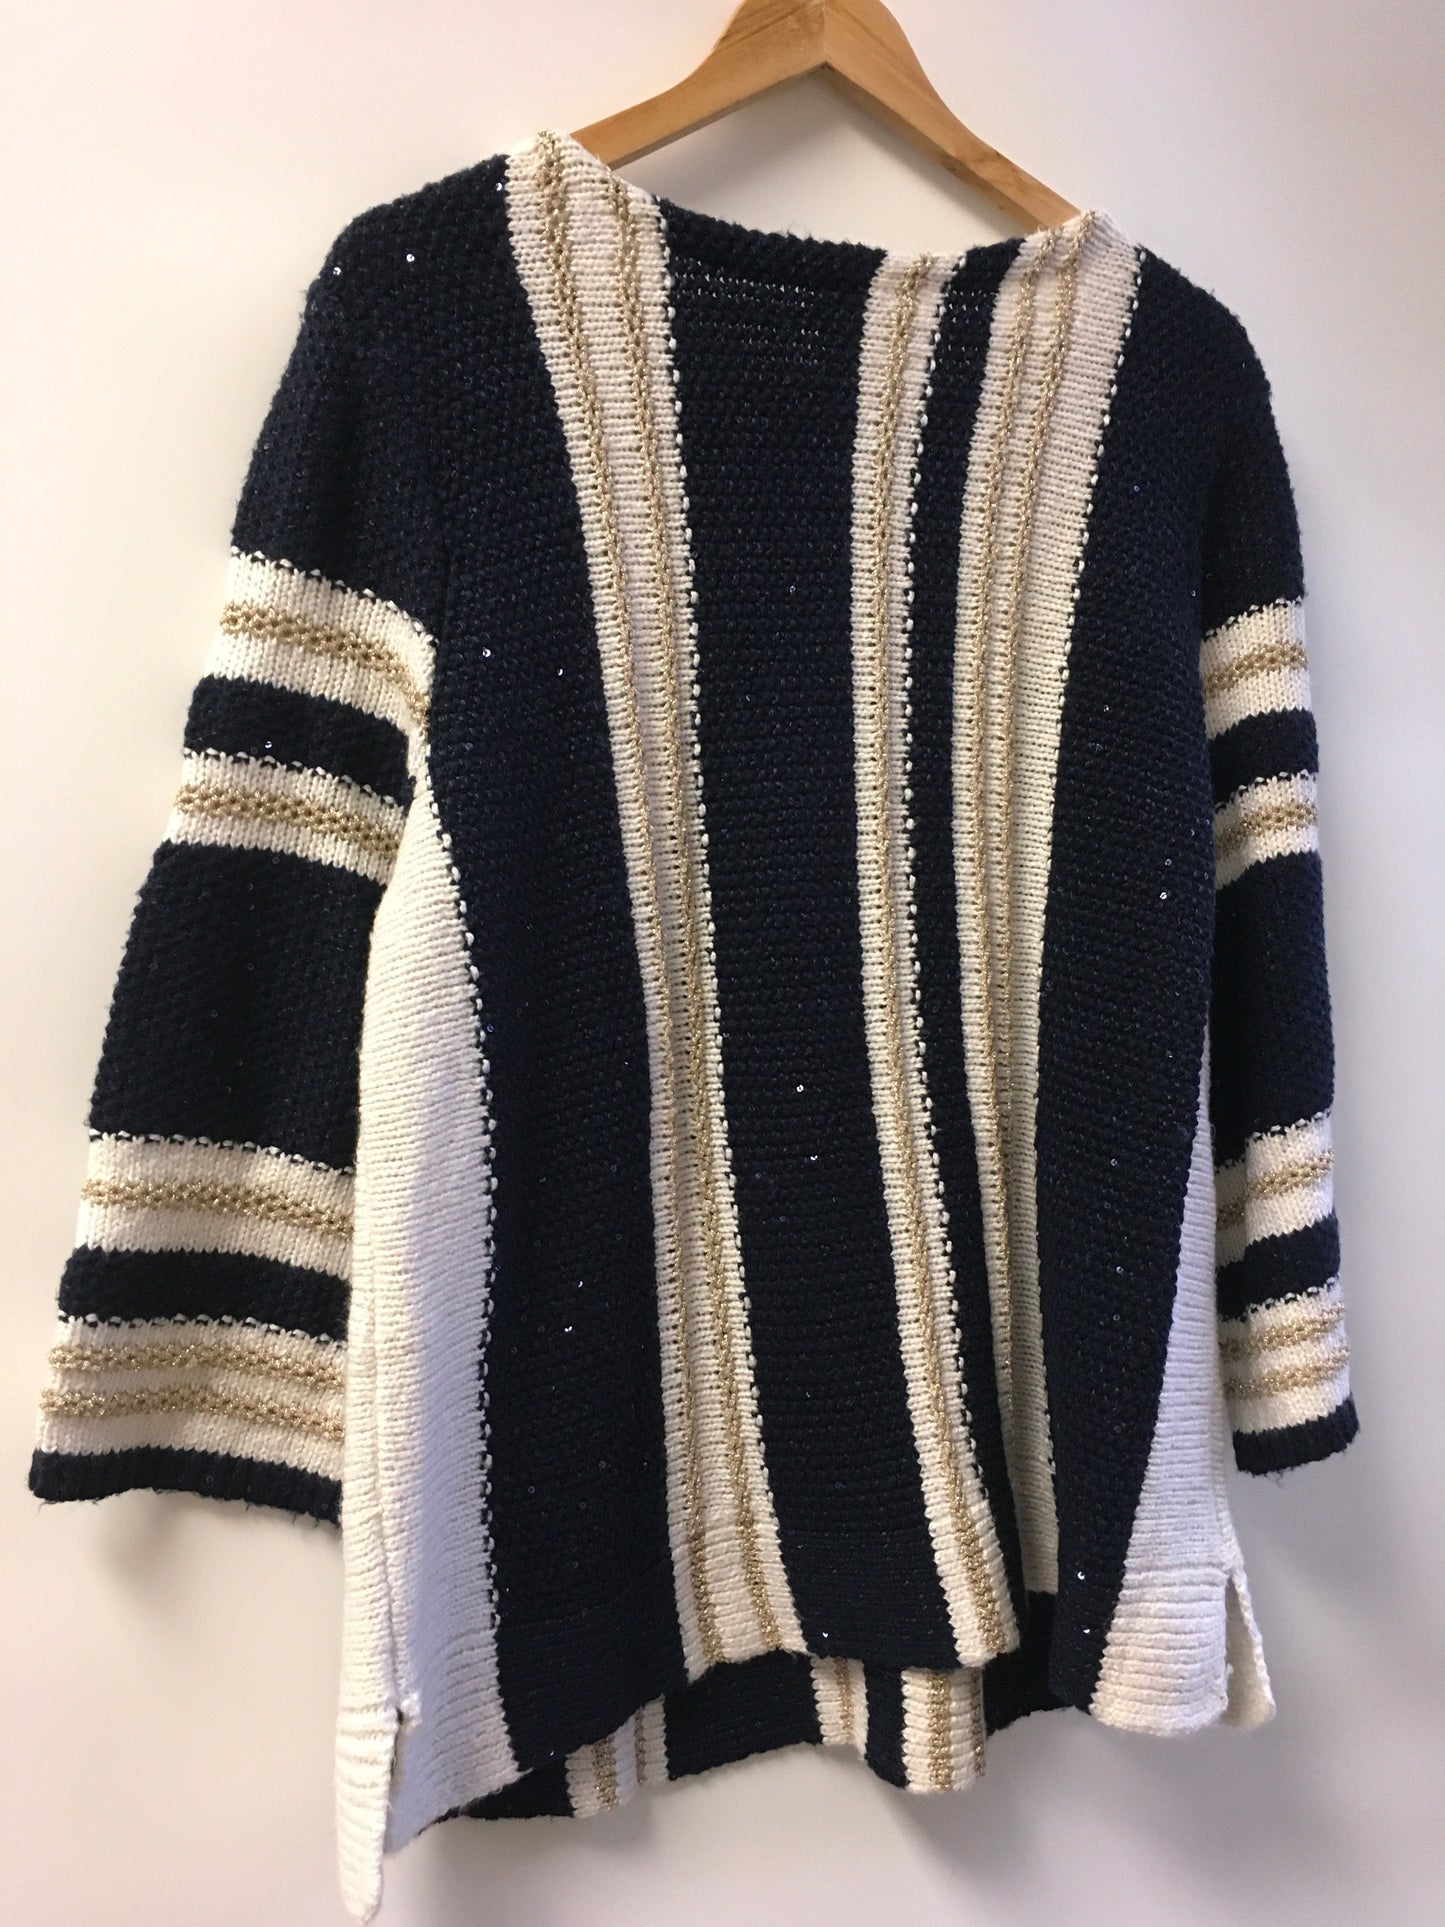 Sweater By Chicos  Size: Xl